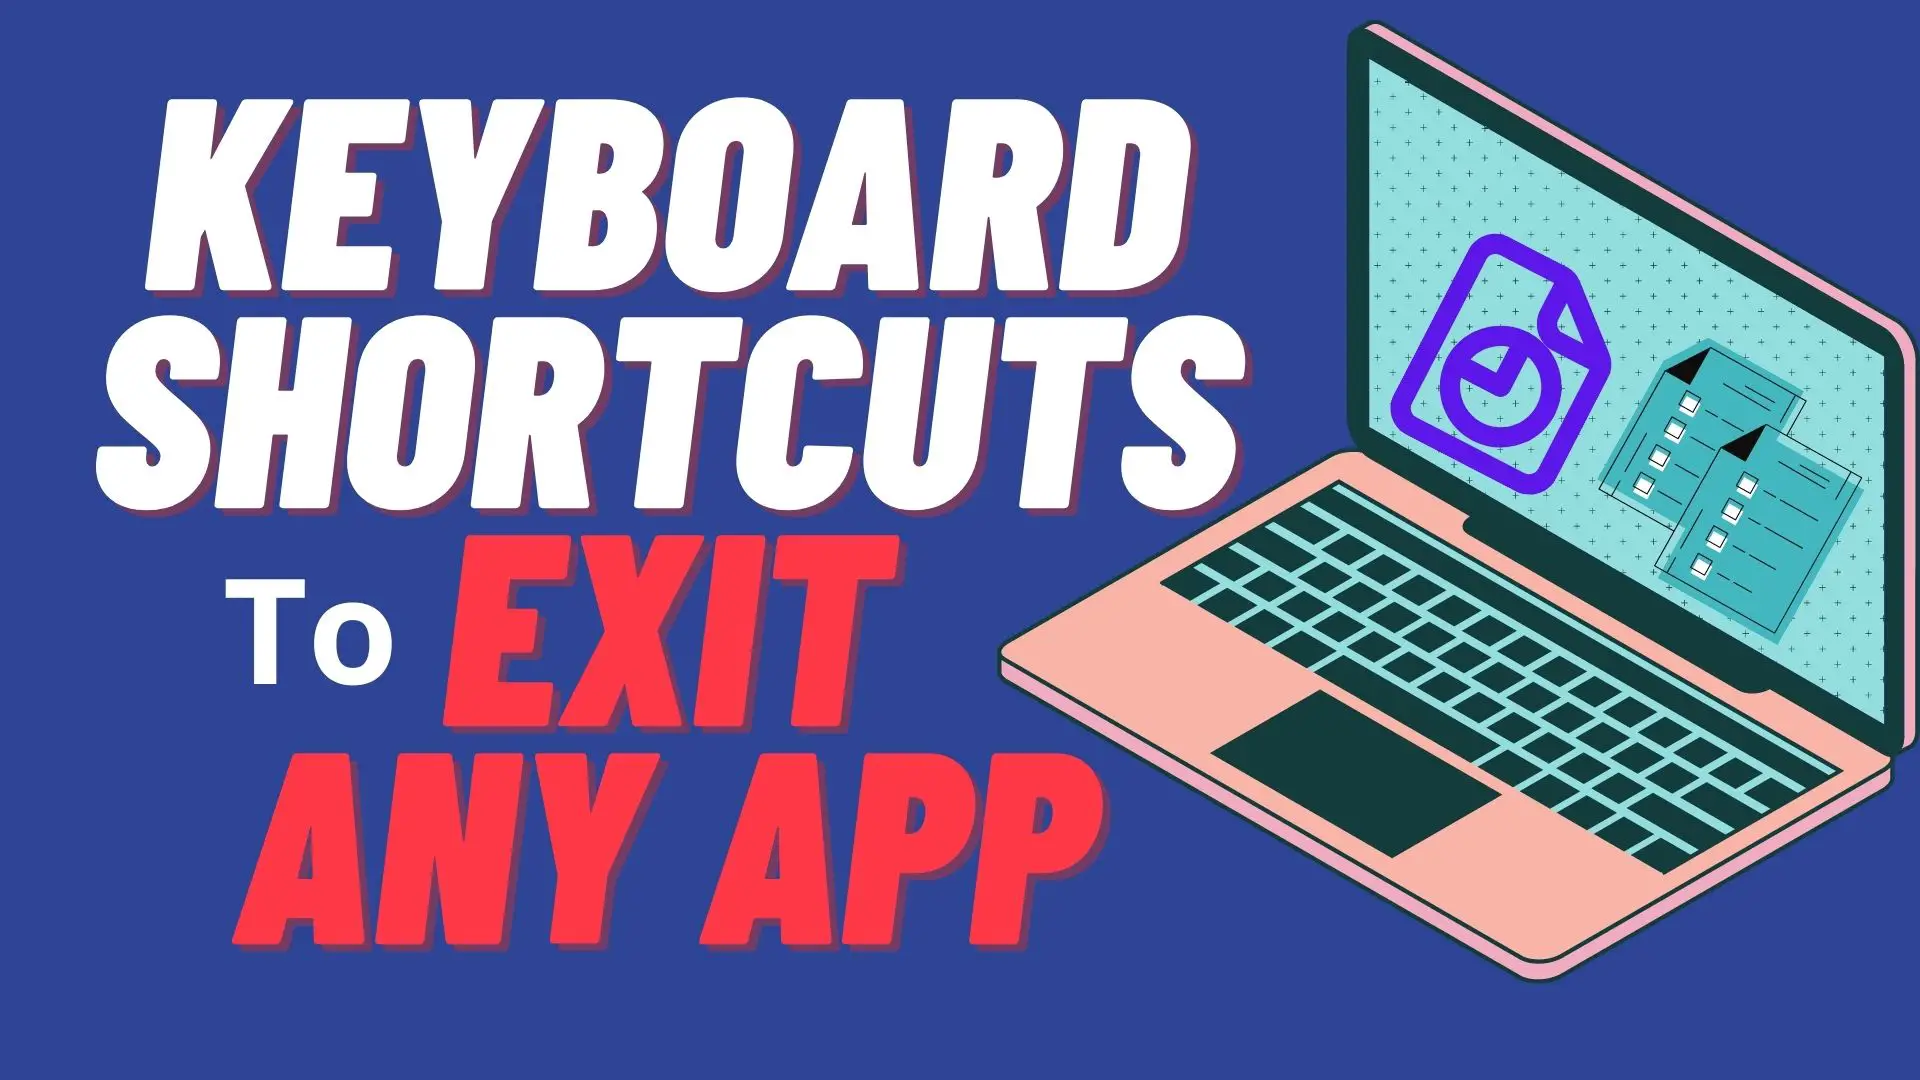 6 Shortcut Keys to Exit MS Word and Other Programs - Keyboard Shortcuts to Close any Application